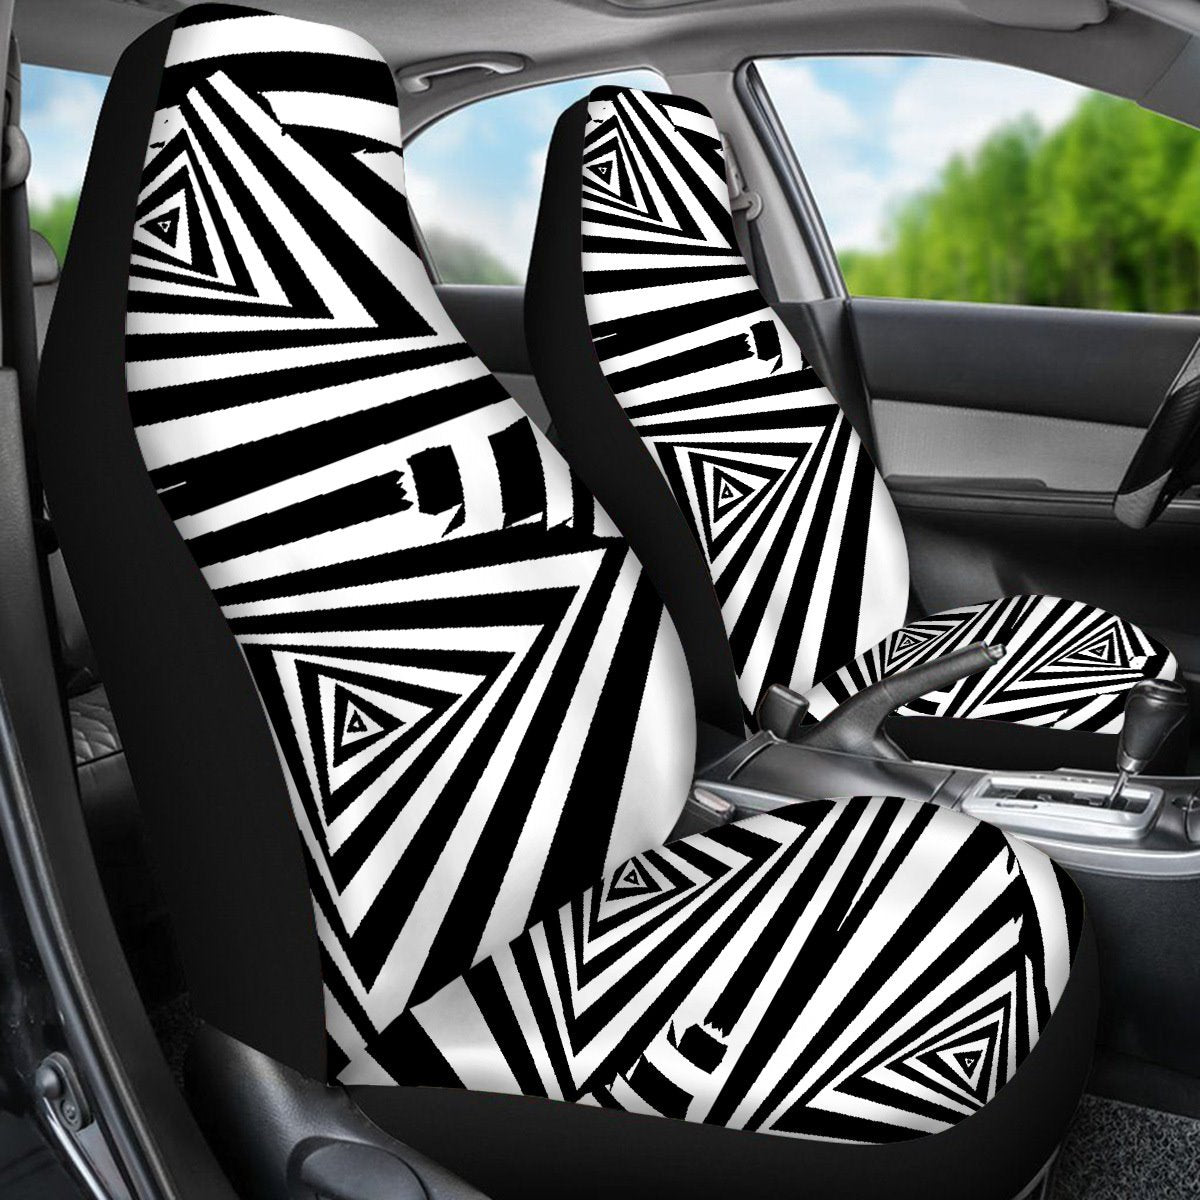 2PCS Front Seat Covers Zebra Pattern Universal Fit Seat Covers Will Stretch to Fit Most Car and SUV Bucket Style Seats